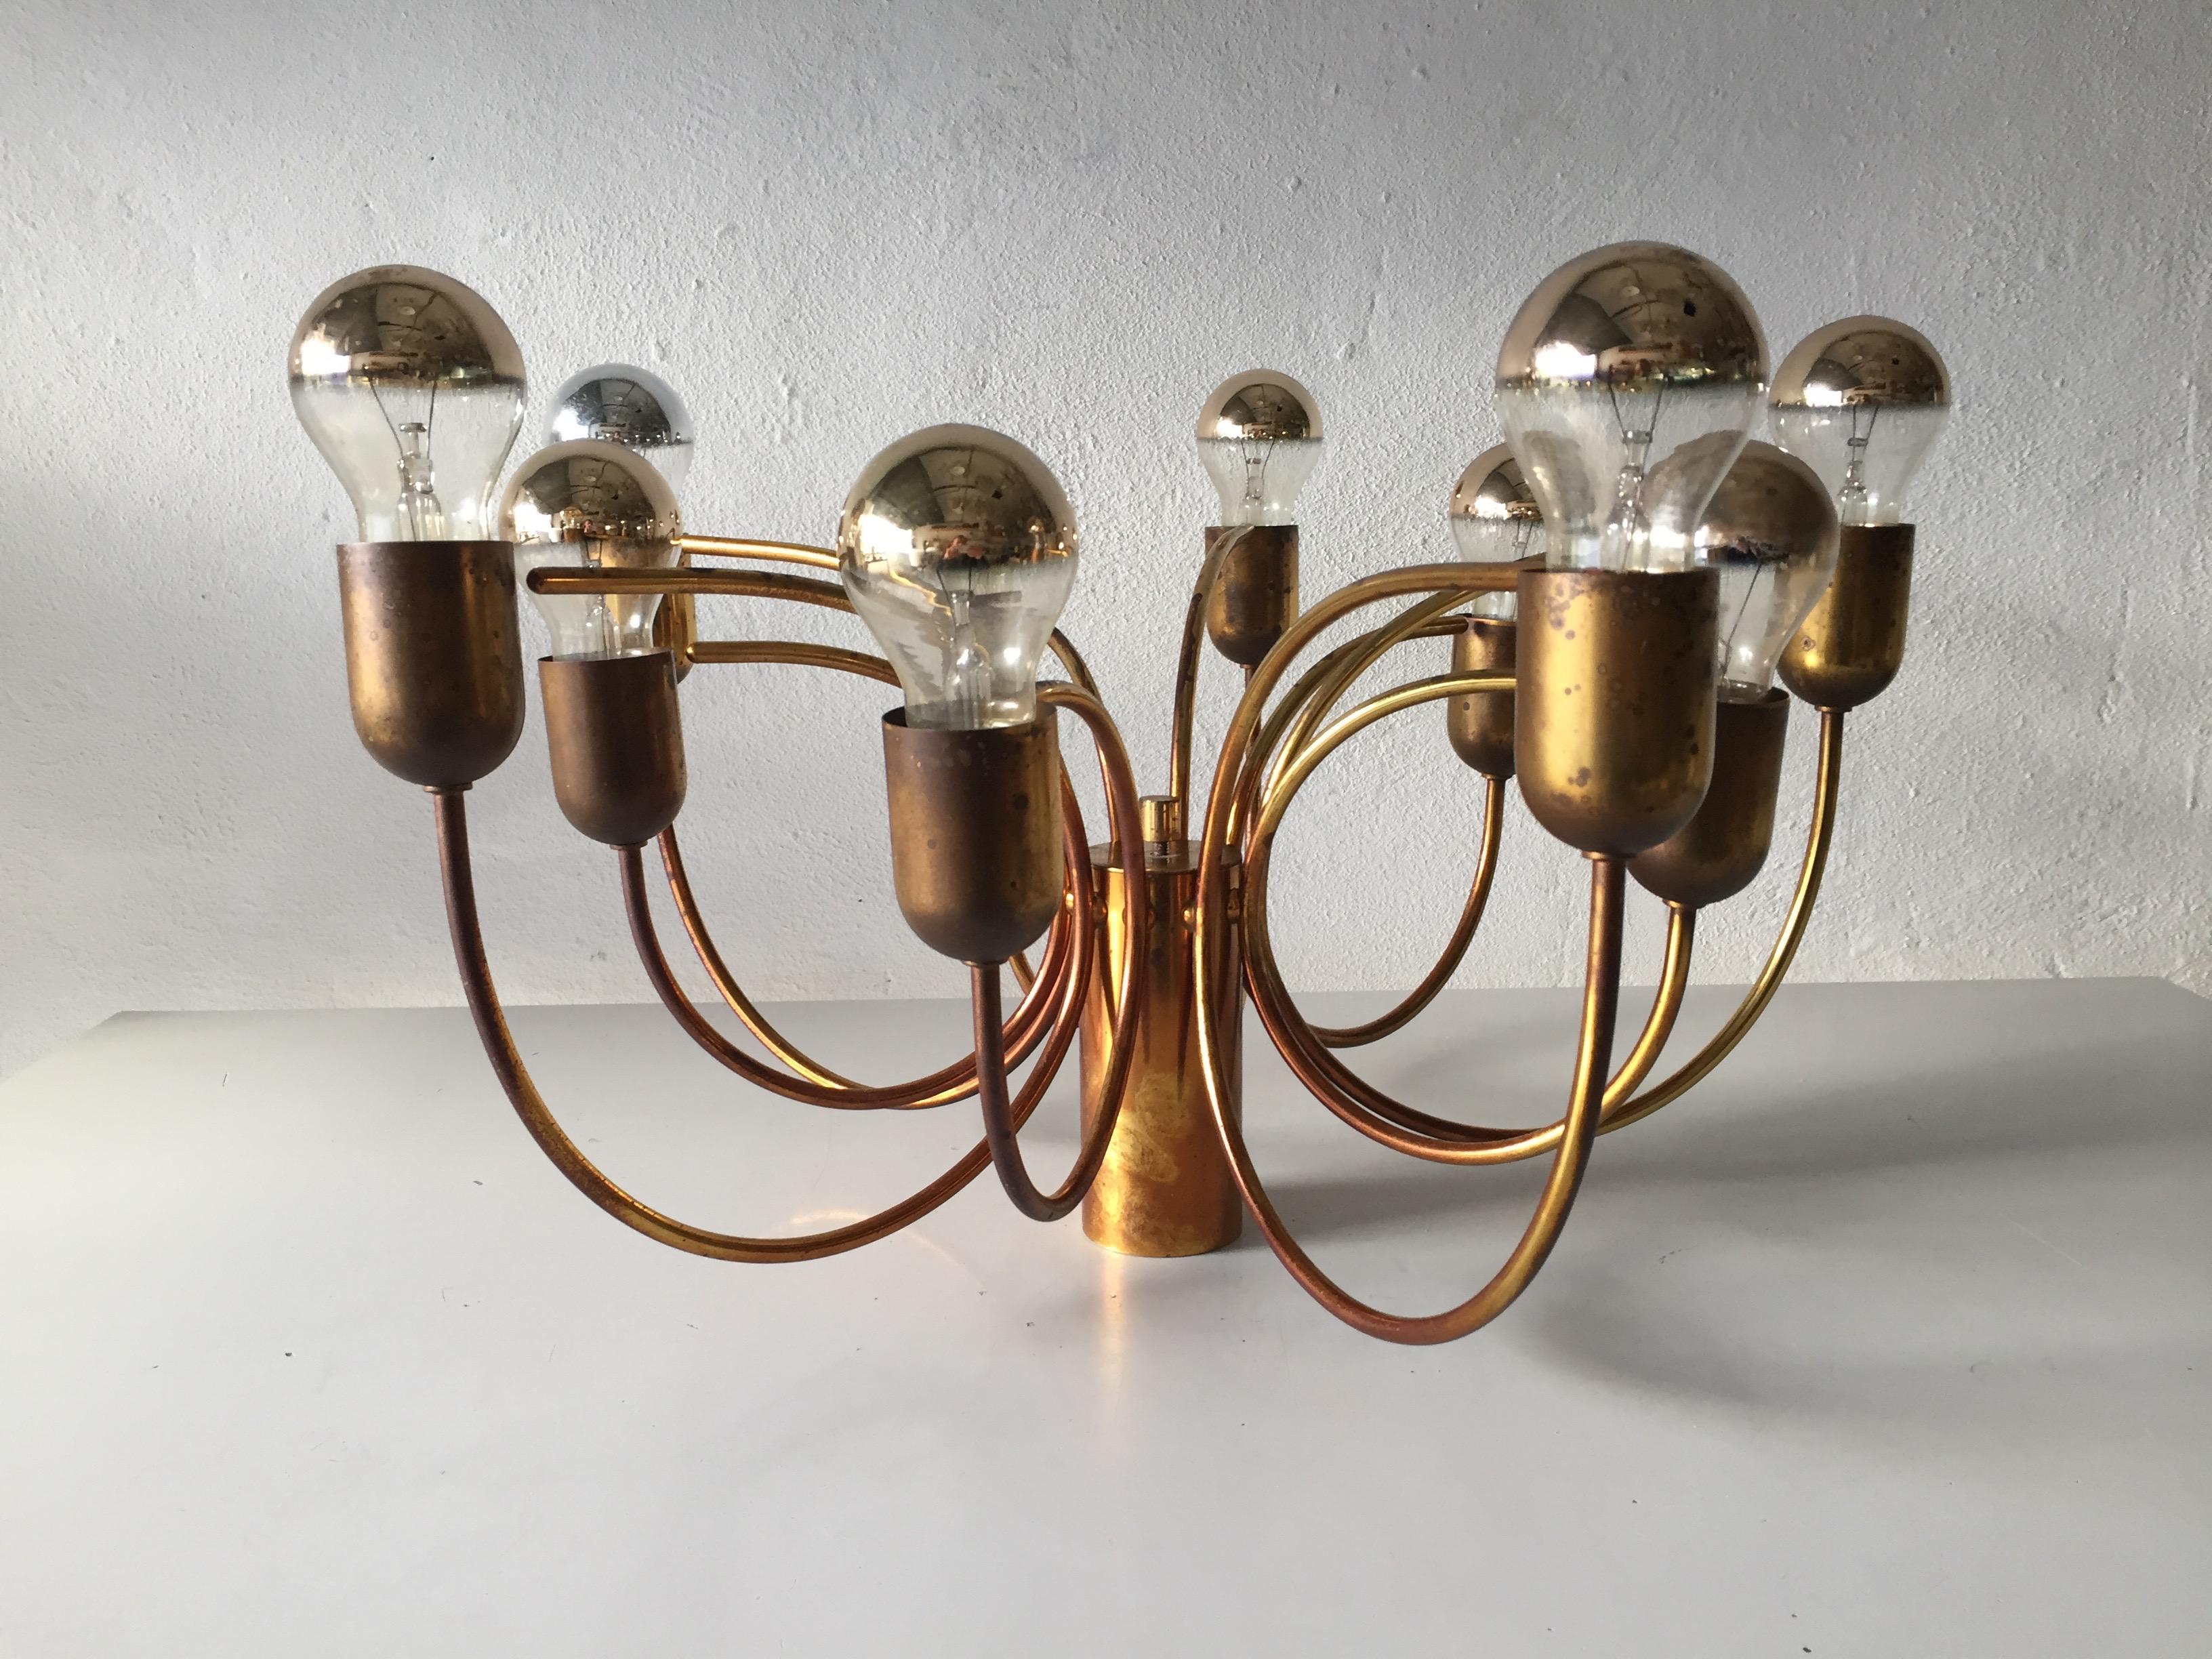 Rare 10 Arc Shaped Arms Full Brass Chandelier by Cosack Leuchten, 1970s Germany In Good Condition For Sale In Hagenbach, DE